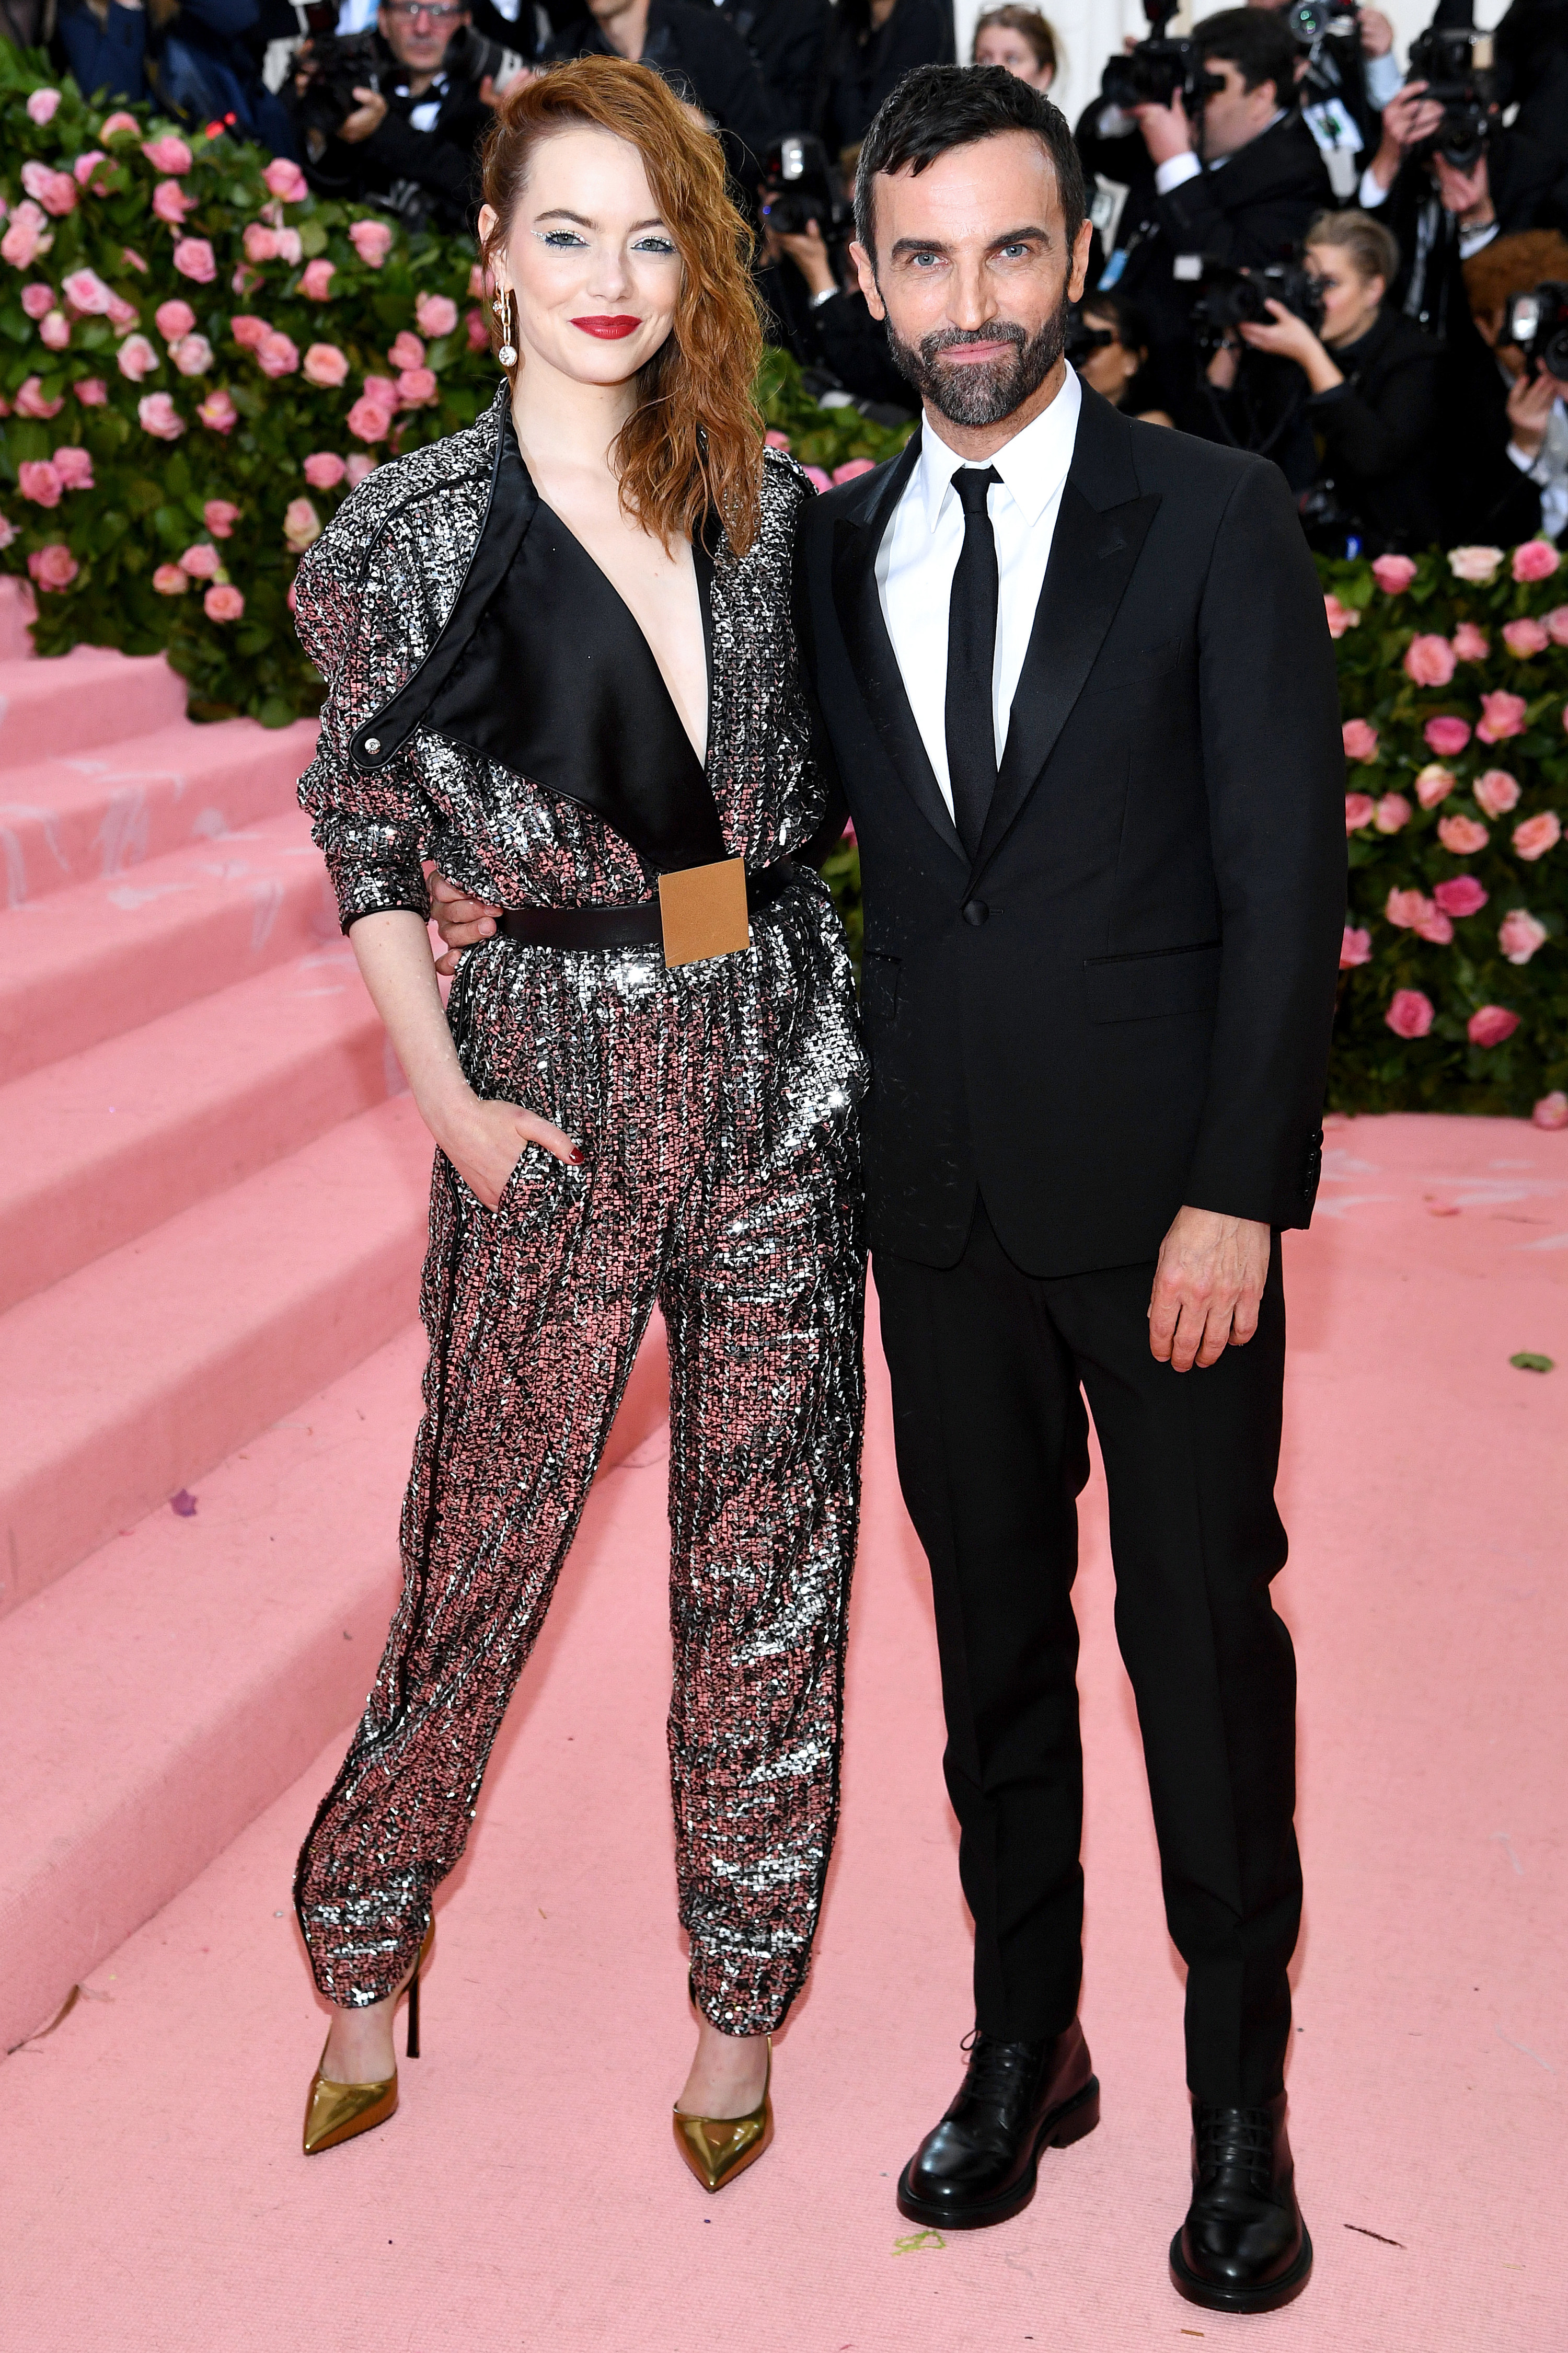 Emma Stone attends The 2019 Met Gala. She wears a metallic, silver, sequinned jumpsuit with a plunging neckline and a black asymmetrical lapel on one side. She teams it with gold pointy toed shoes and a gold buckled belt.